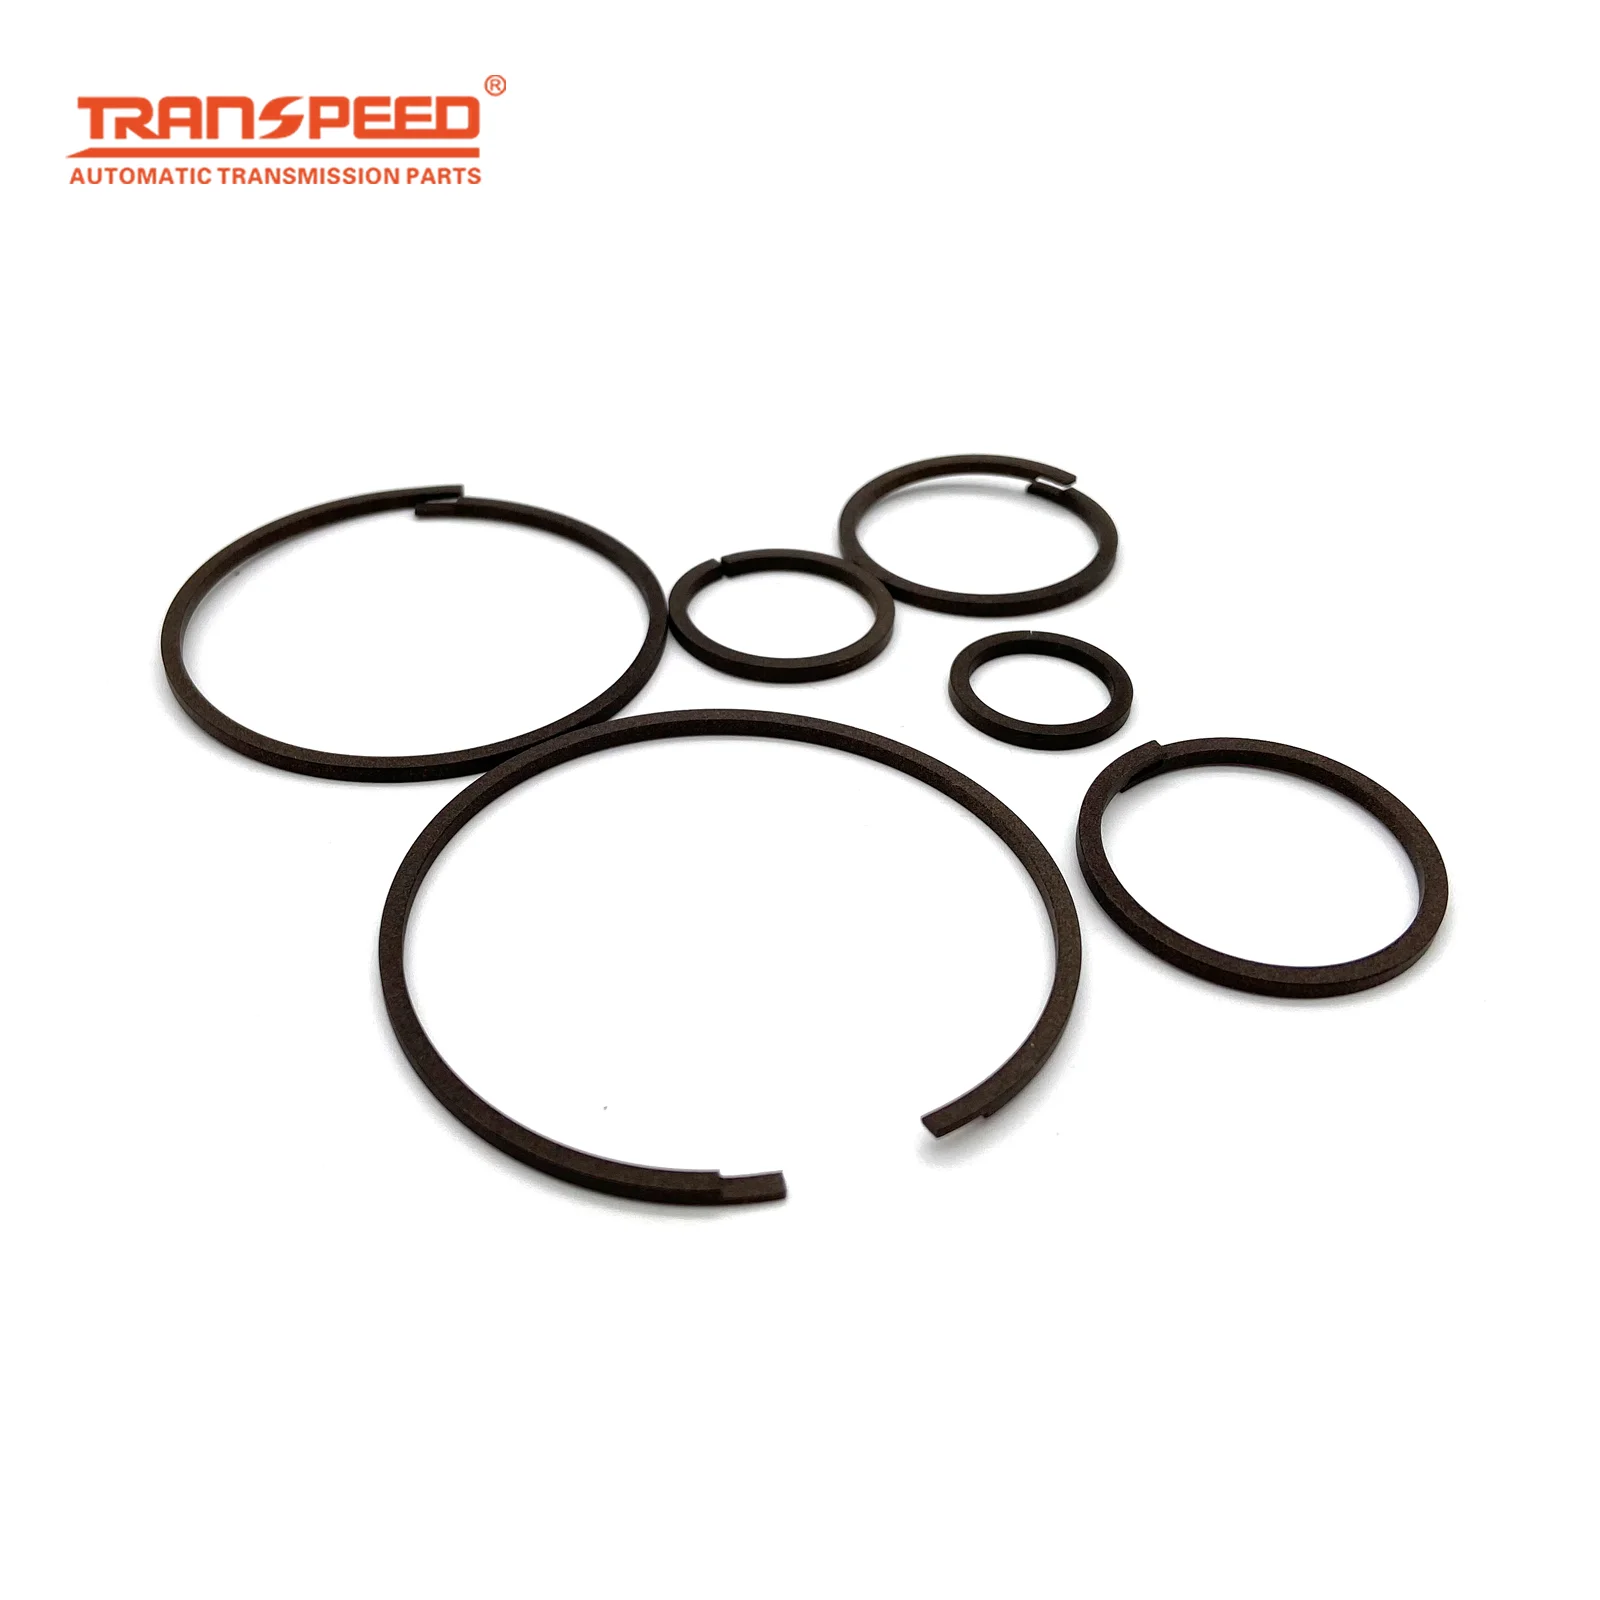 

TRANSPEED Automatic Transmission AL4 DPO Oil Ring Seal Ring Kit for 2215.15 230456 256503 256504 Gearbox Oil Seal Rings Kit